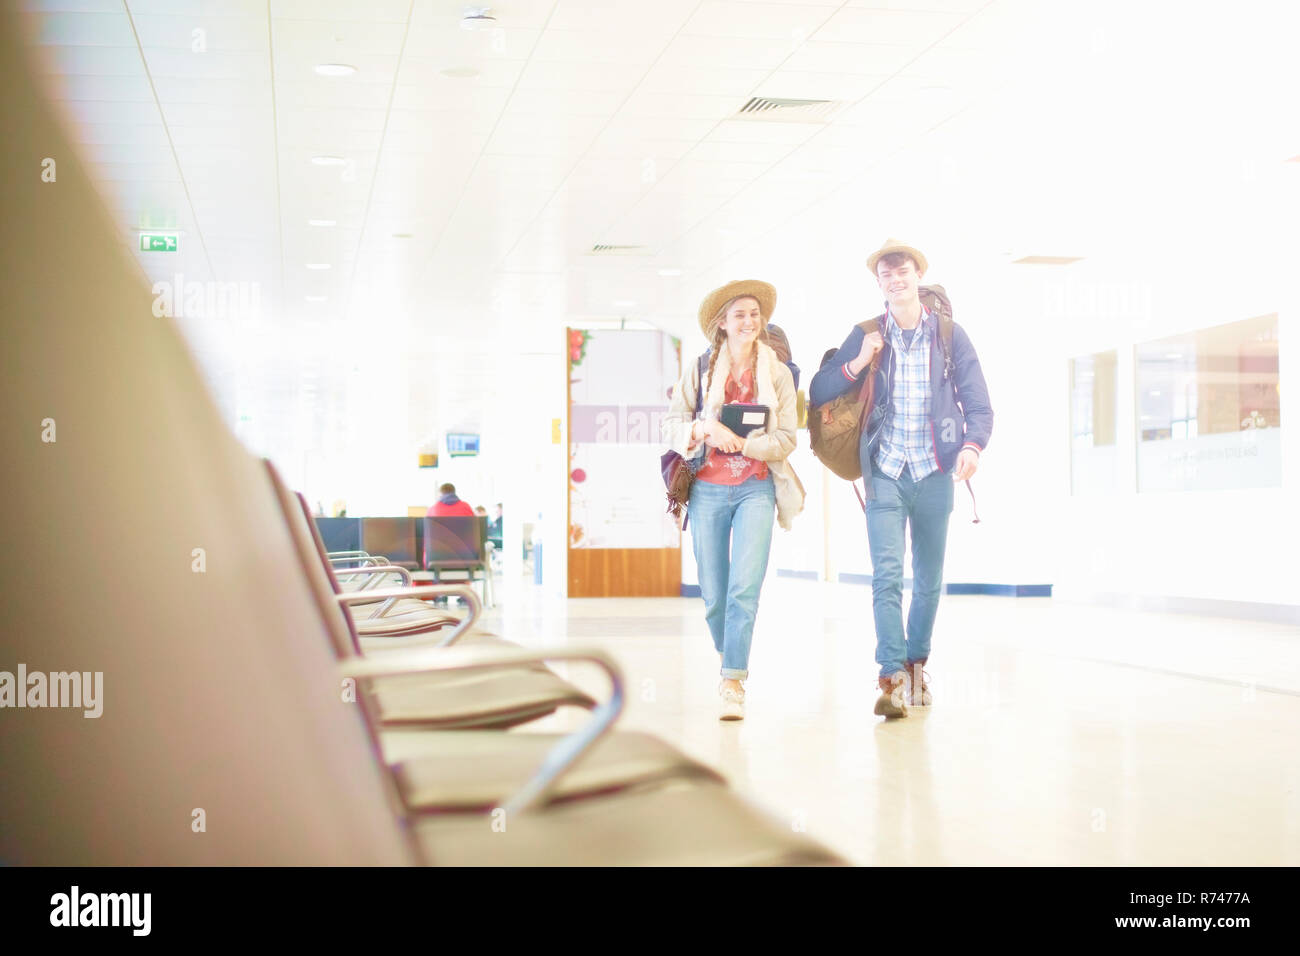 Young couple at airport carrying backpacks, low angle view Stock Photo